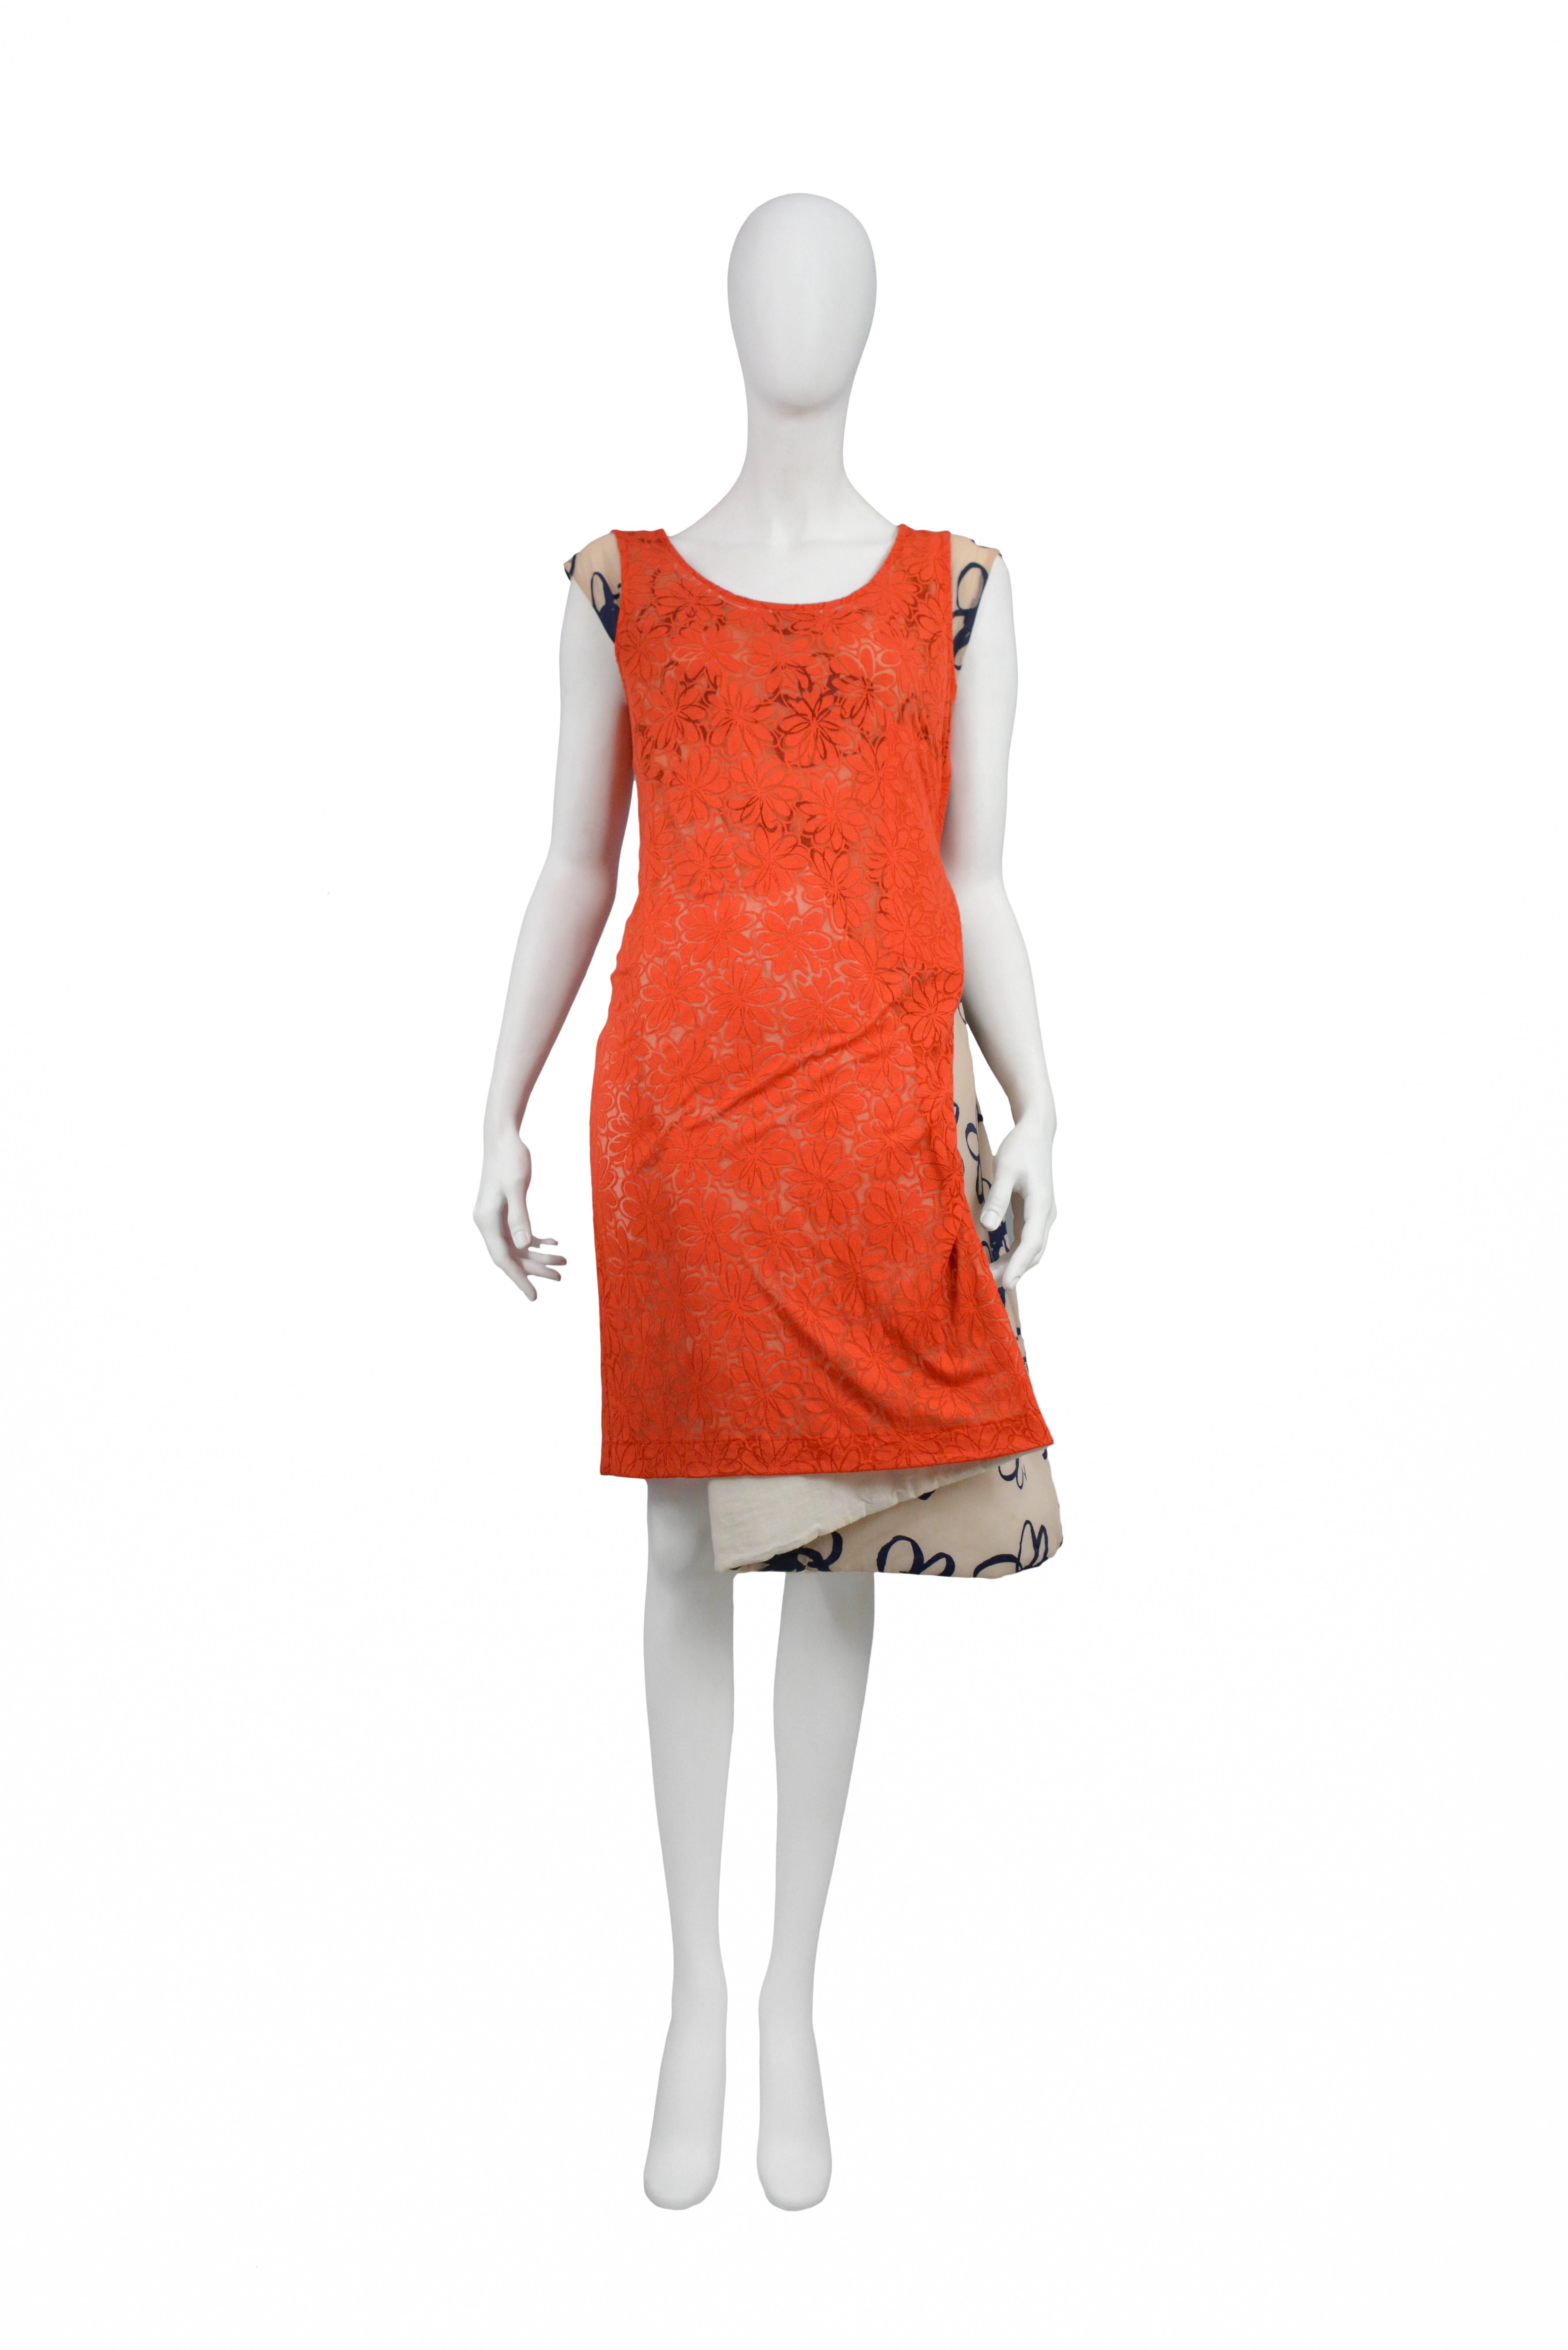 Very rare padded floral wrap dress with red lace outer layer. AW 1996.
Please inquire for additional images,